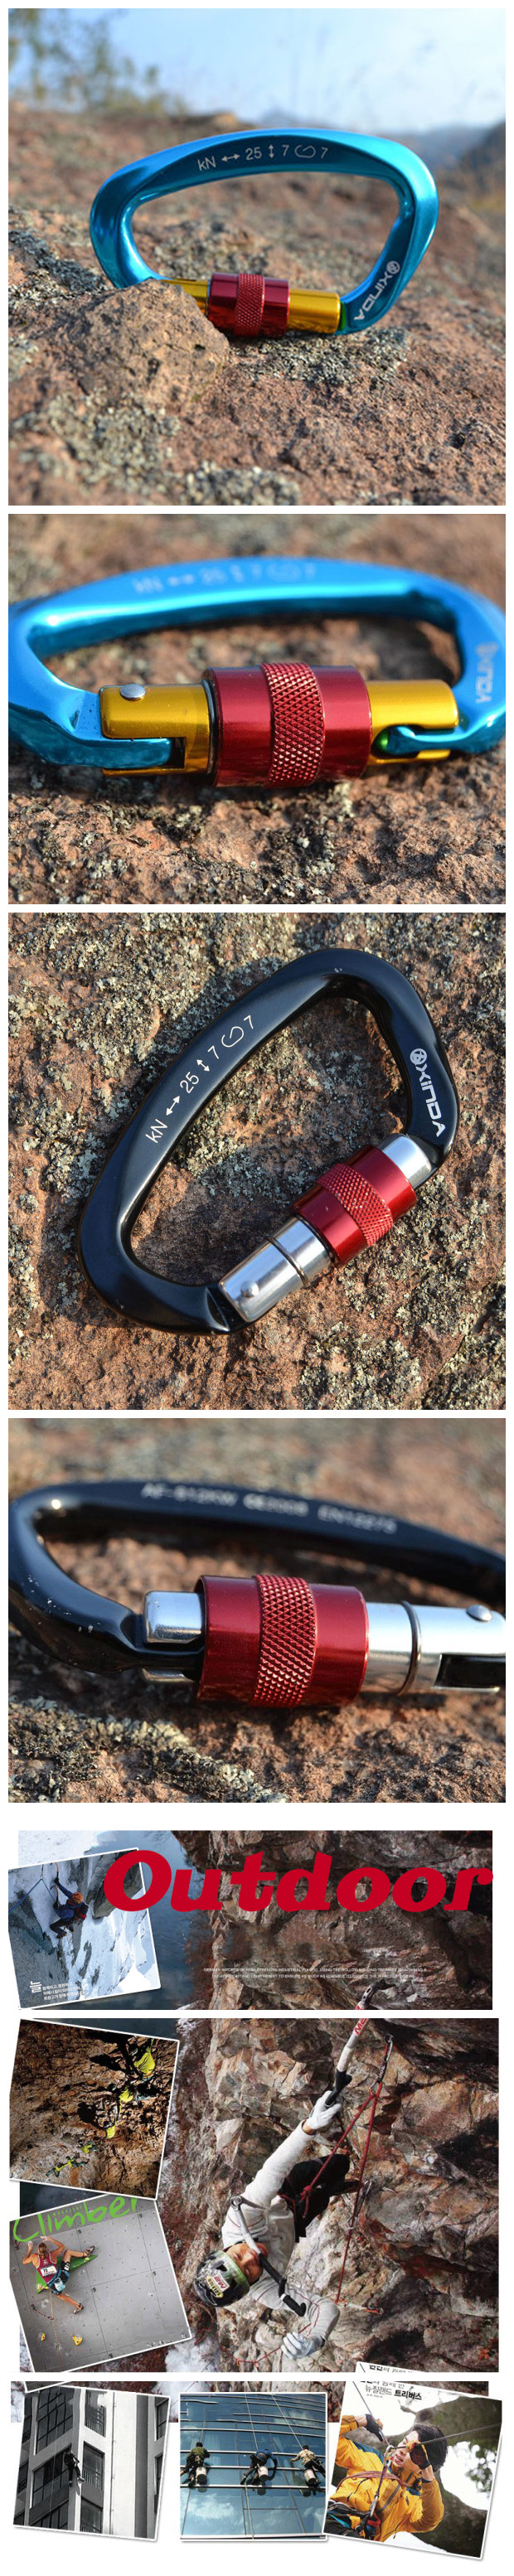 Xinda-Camping-Main-Lock-Carabiner-Safety-Buckle-For-Mountaineering-Rock-Climbing-Alloy-D-shaped-1025252-7